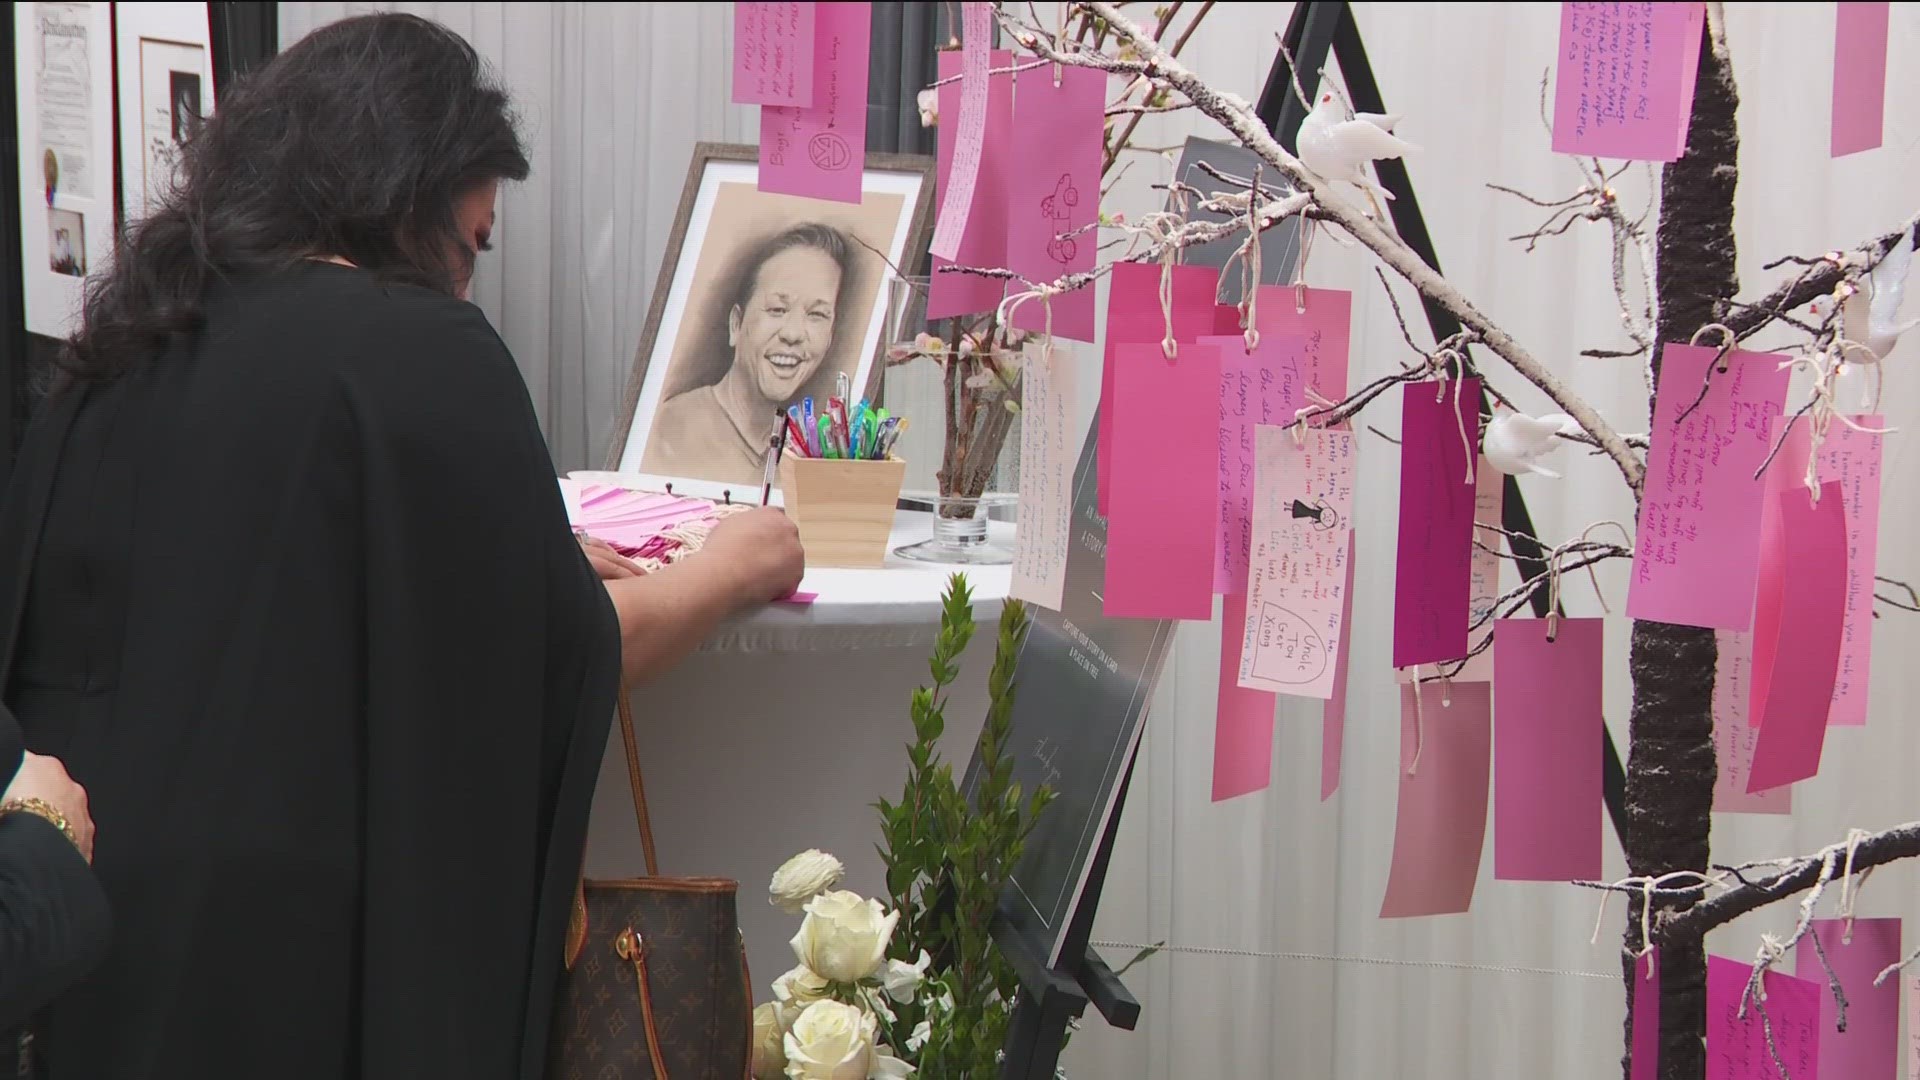 Saturday's memorial service was attended by hundreds of members of the Hmong community, as well as politicians, including MN Governor Tim Walz.